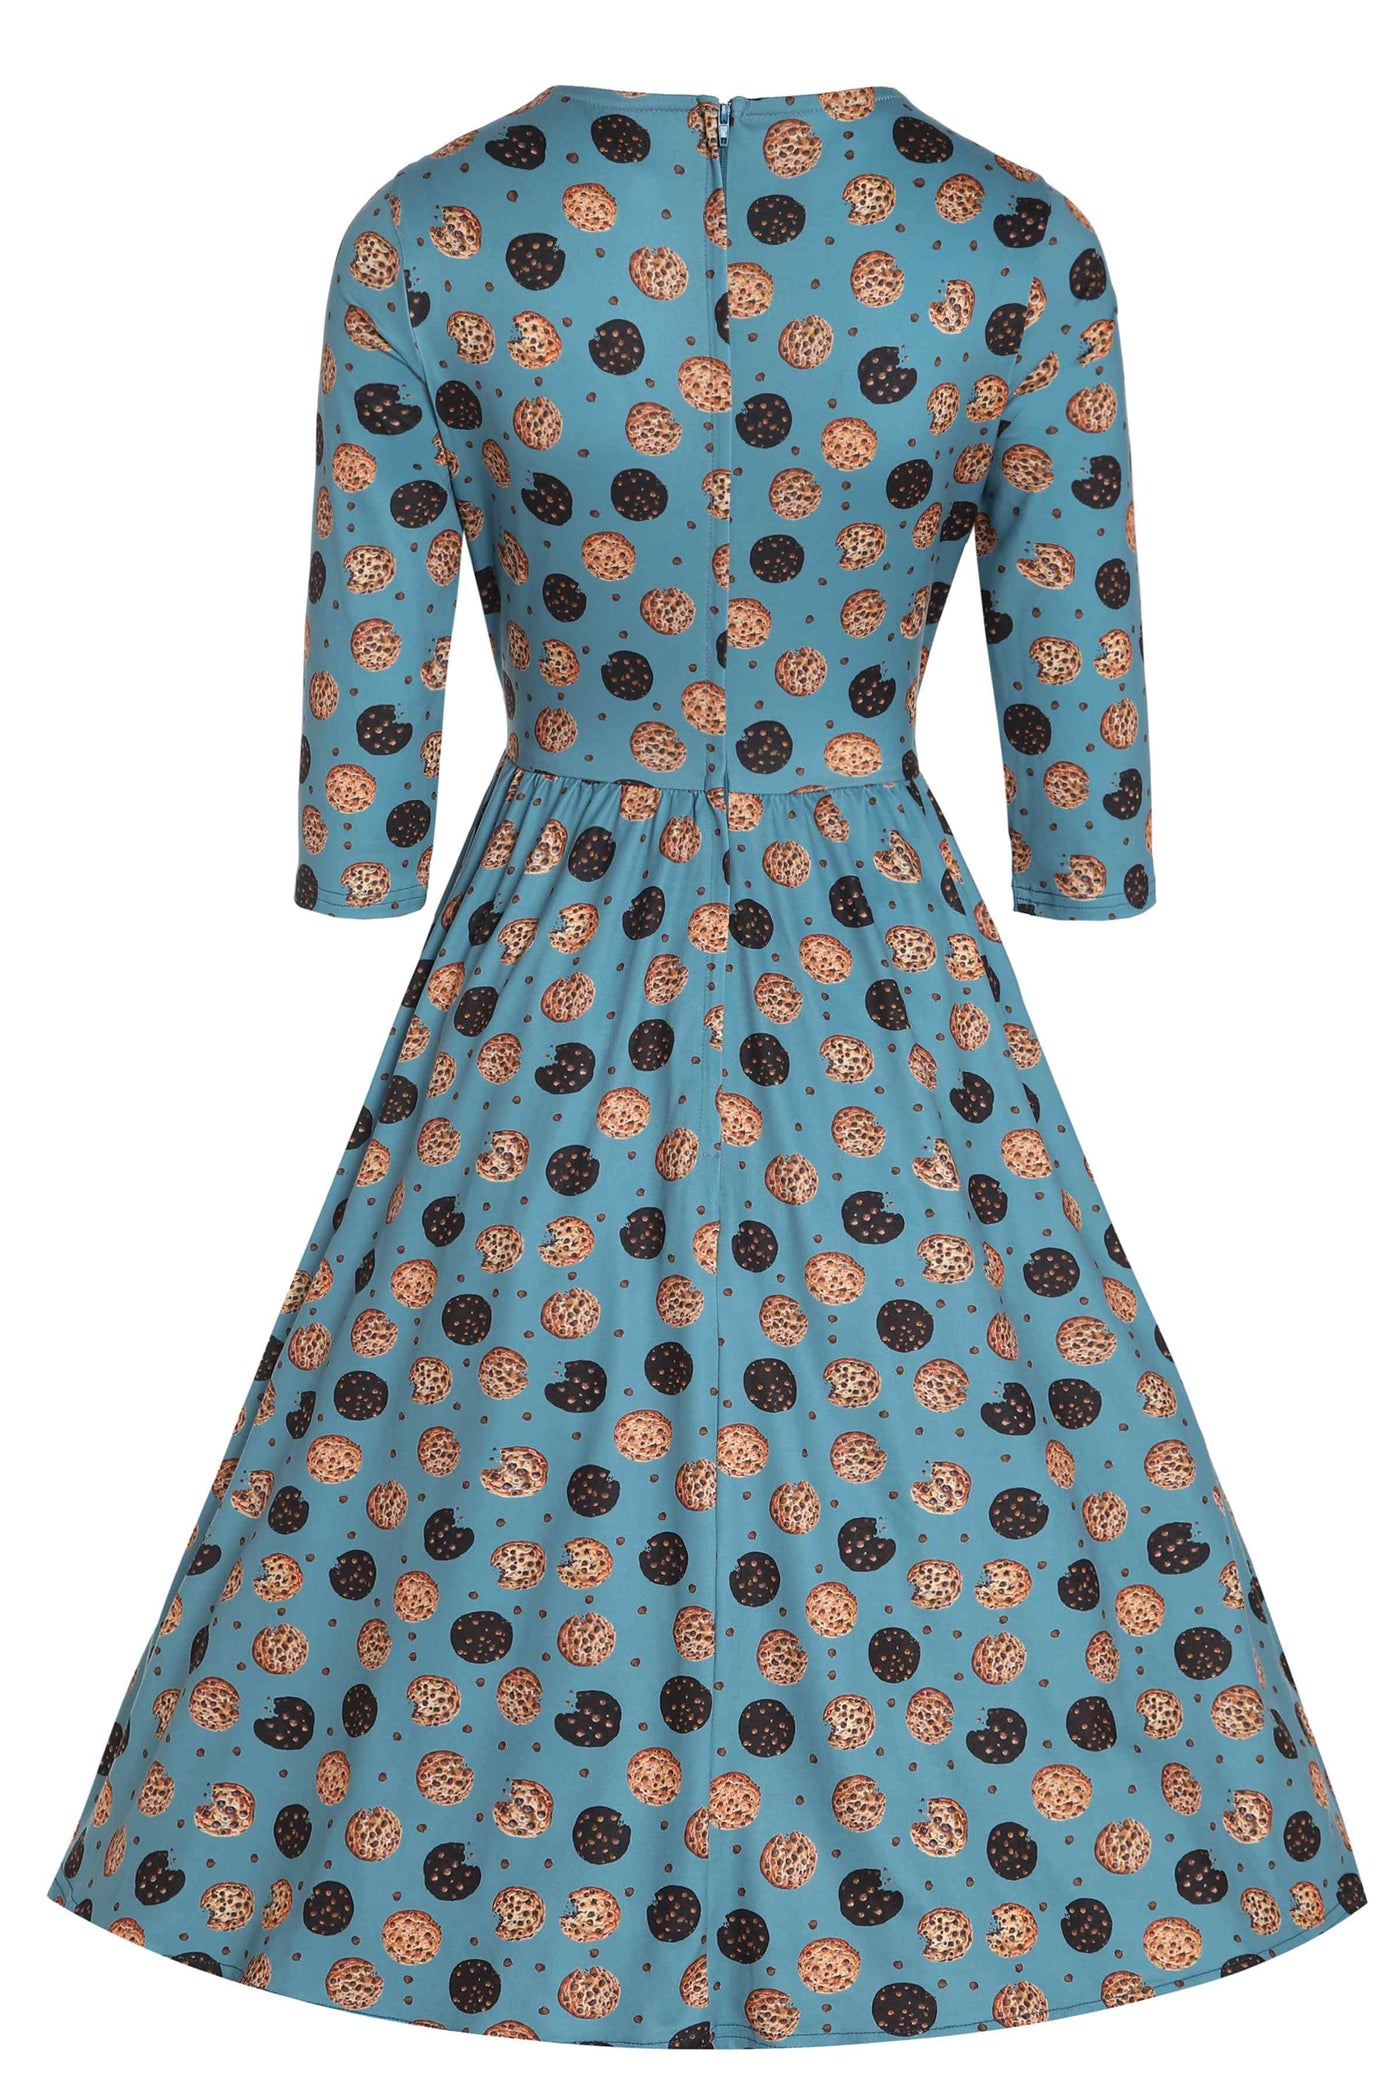 Back View of Cookie Blue Long Sleeved Dress